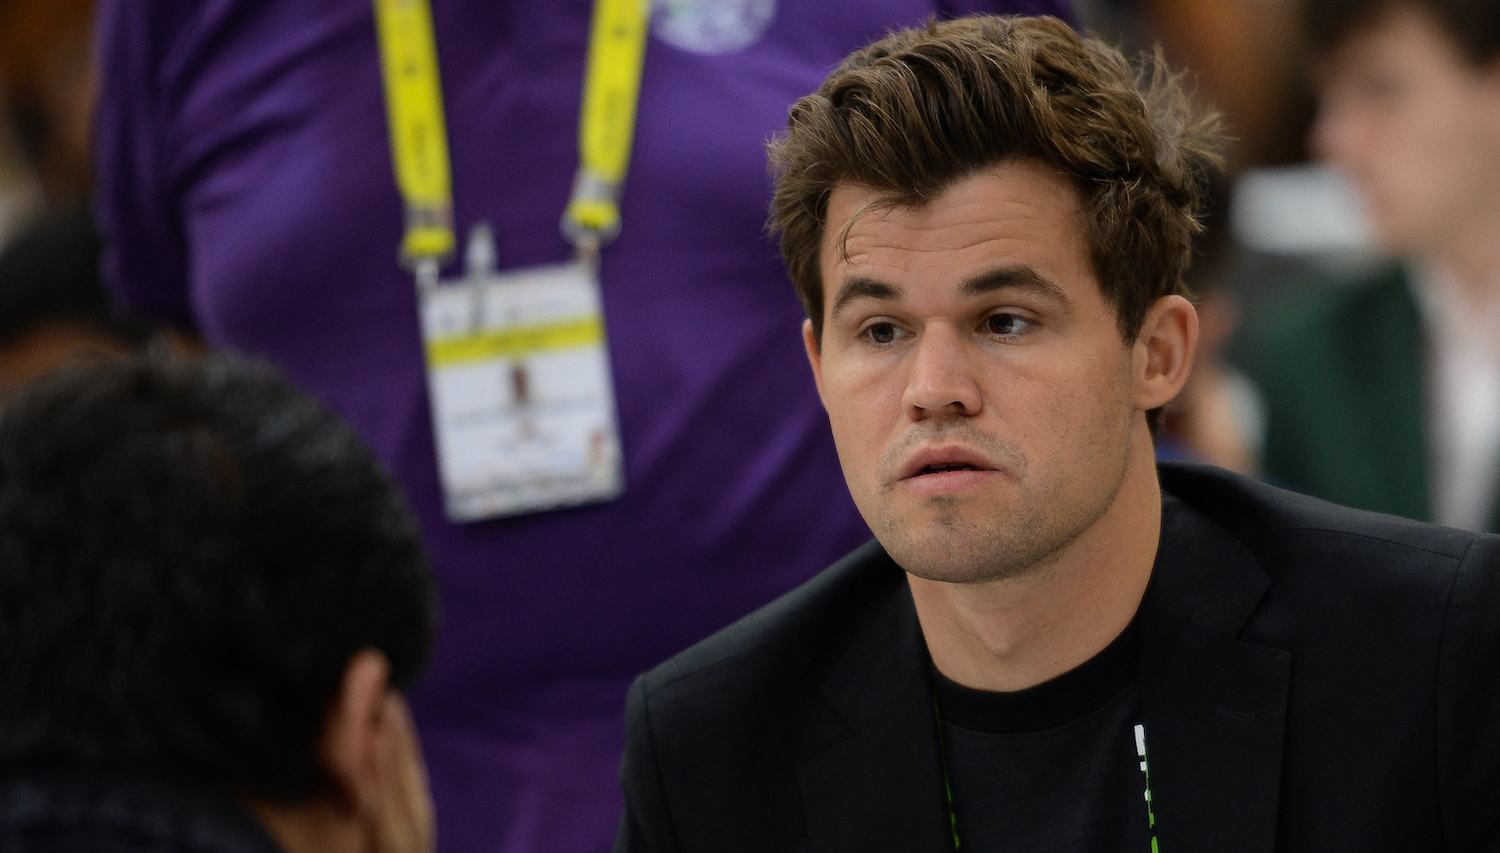 Norways Magnus Carlsen (R) gestures during his round 9 game against the Indonesias team at the 44th Chess Olympiad 2022, in Mahabalipuram on August 7, 2022. (Photo by Arun SANKAR / AFP) (Photo by ARUN SANKAR/AFP via Getty Images)